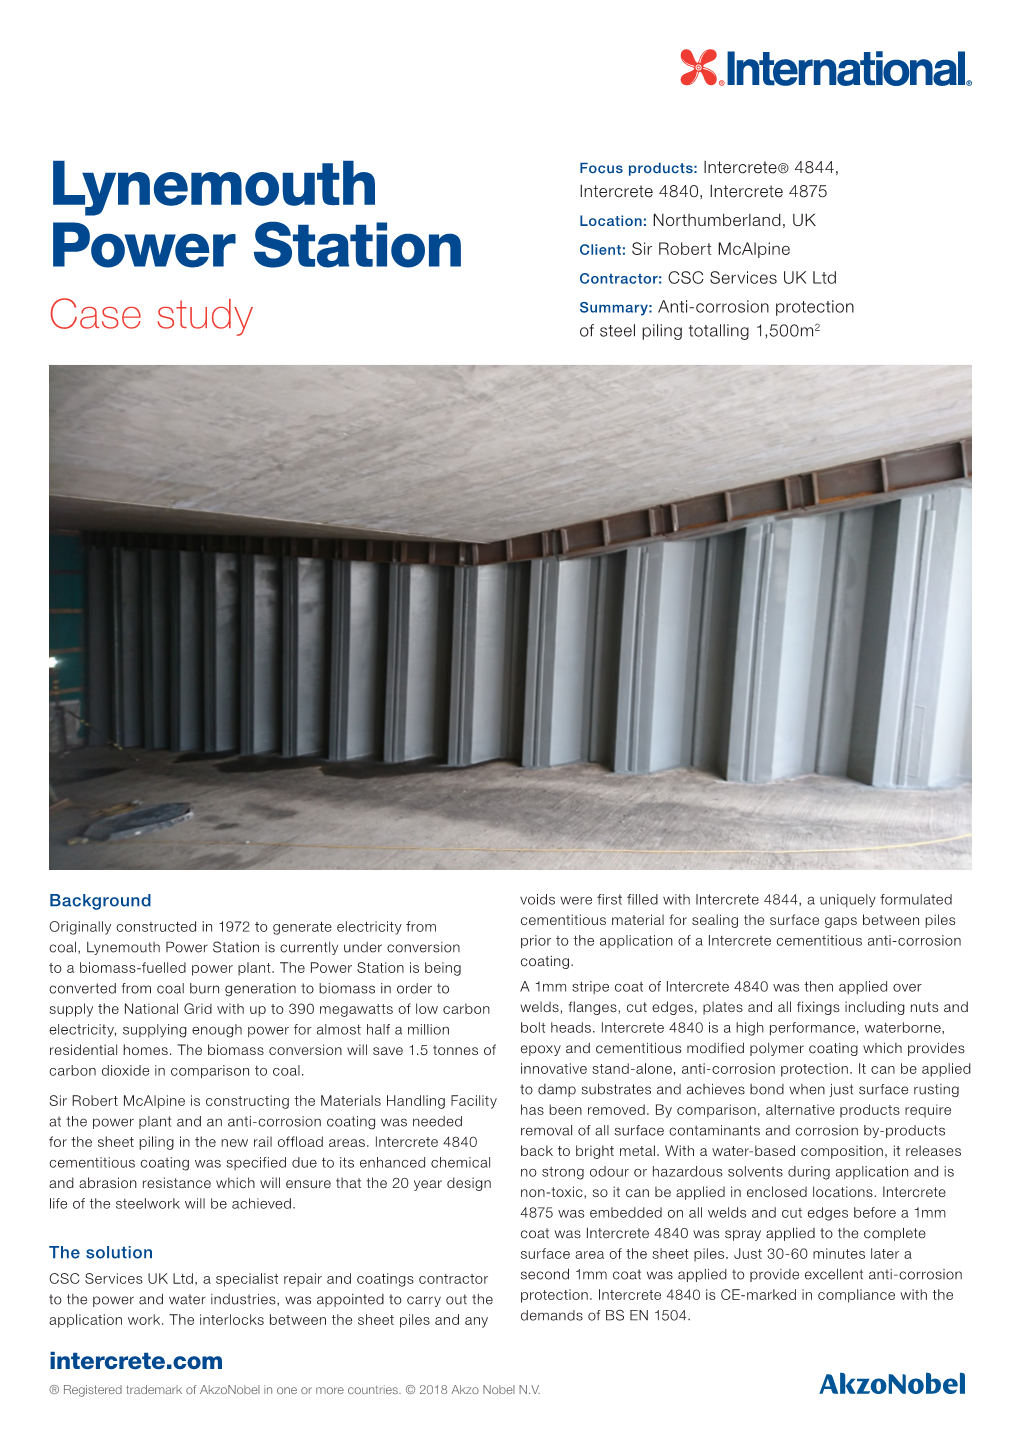 Lynemouth Power Station Is Currently Under Conversion Prior to the Application of a Intercrete Cementitious Anti-Corrosion to a Biomass-Fuelled Power Plant